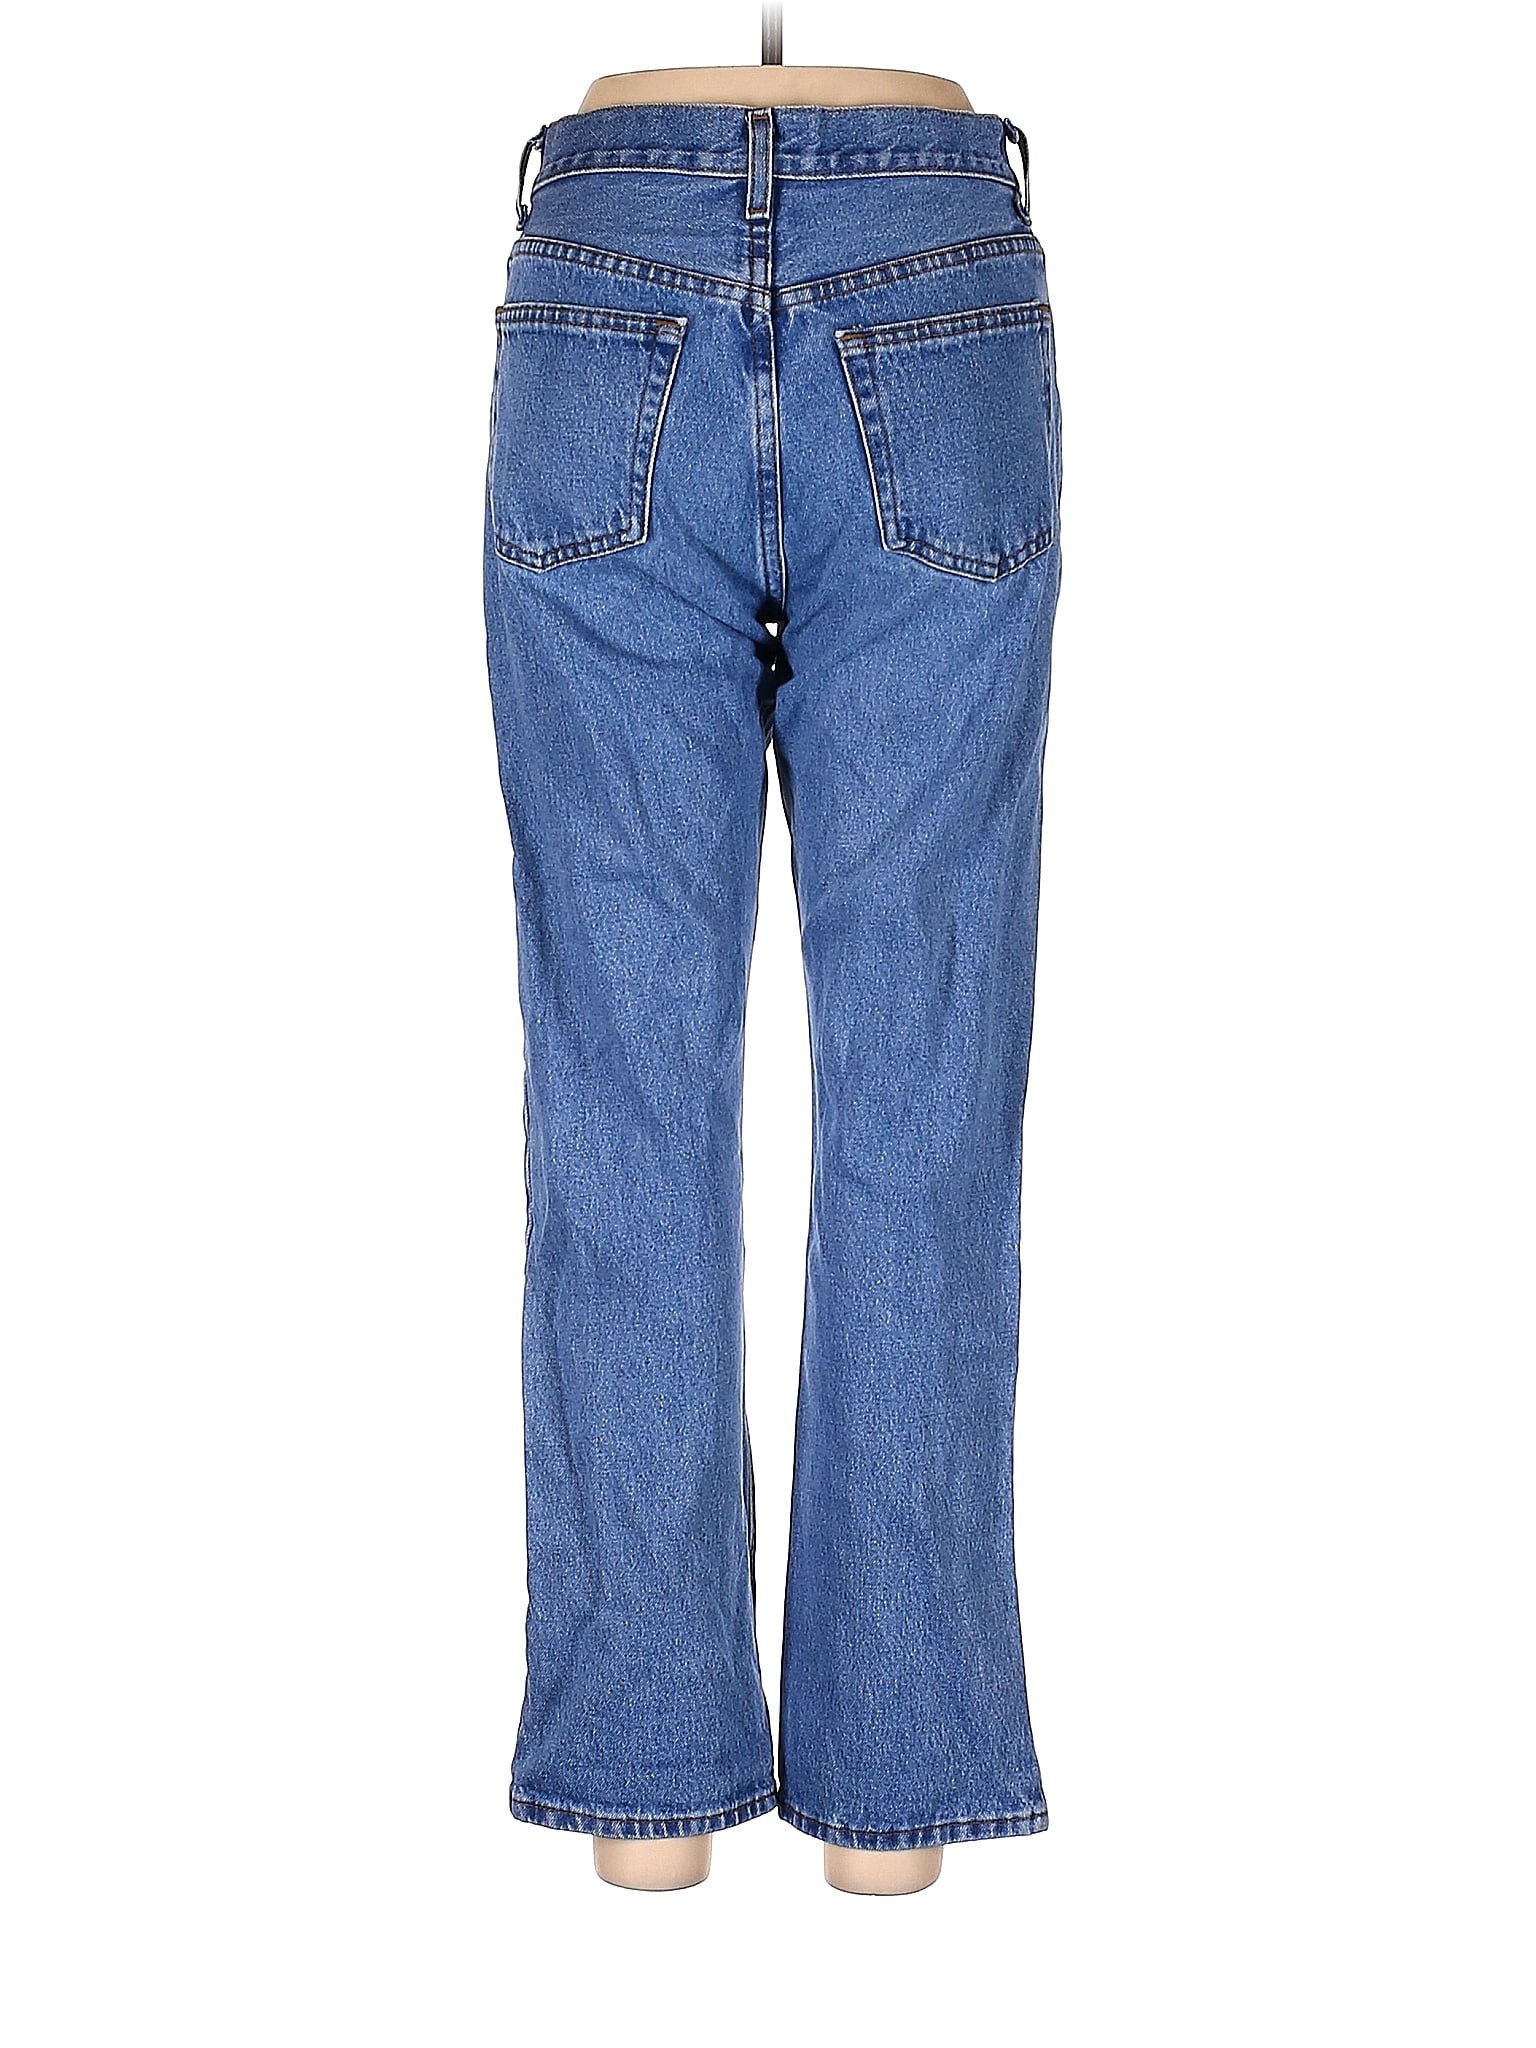 George Women's Jeans for sale